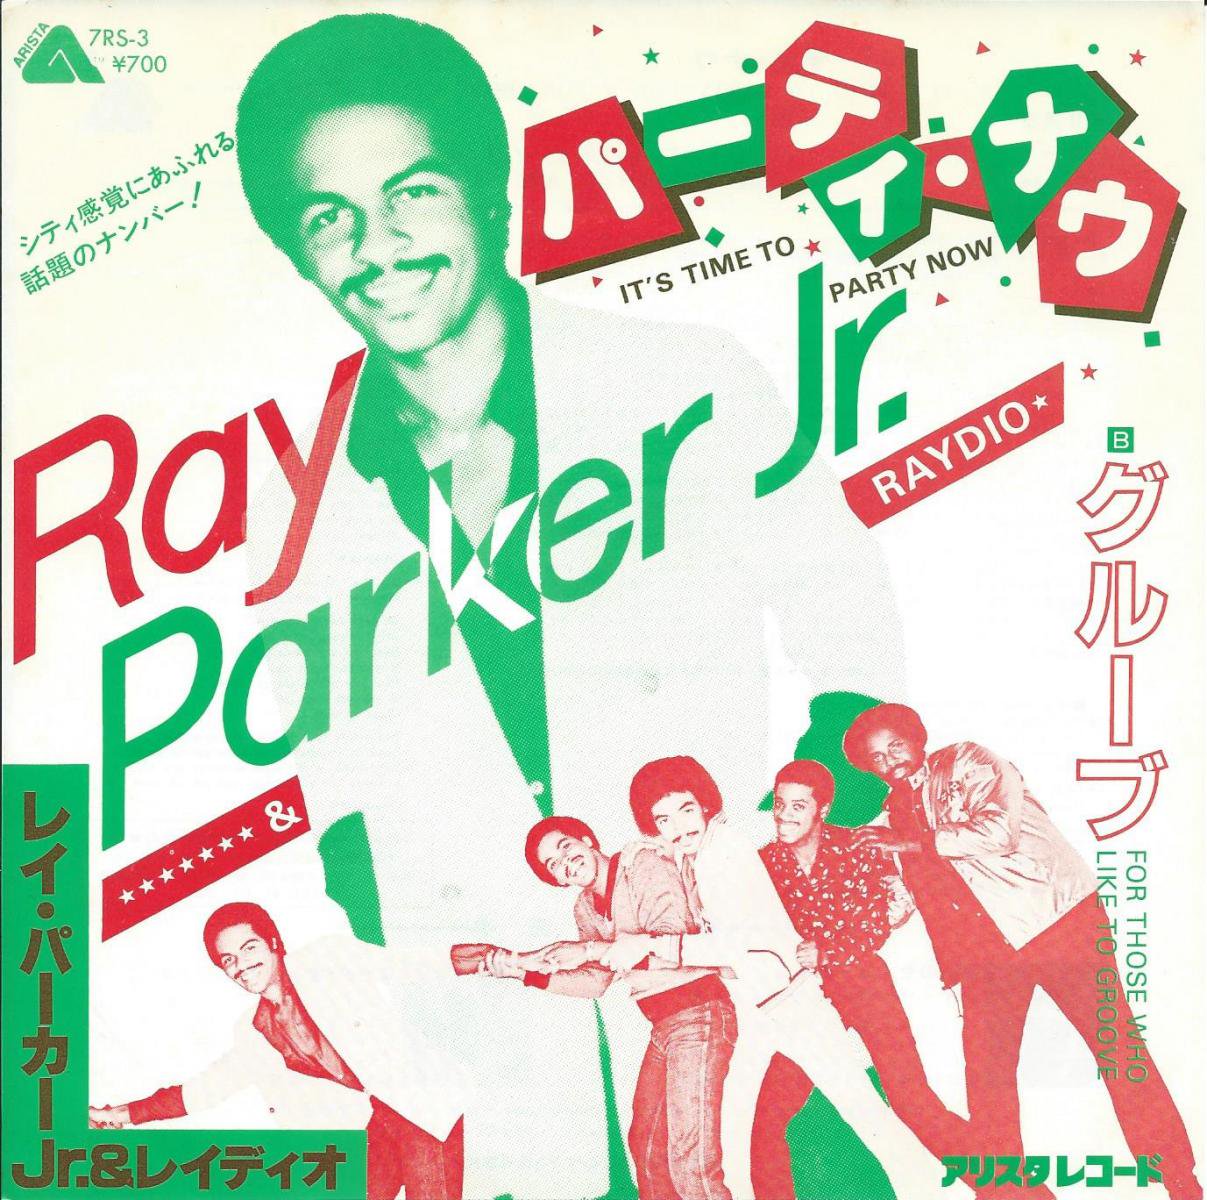 쥤ѡJr.& 쥤ǥ RAY PARKER JR.AND RAYDIO / ѡƥʥ IT'S TIME TO PARTY NOW (7